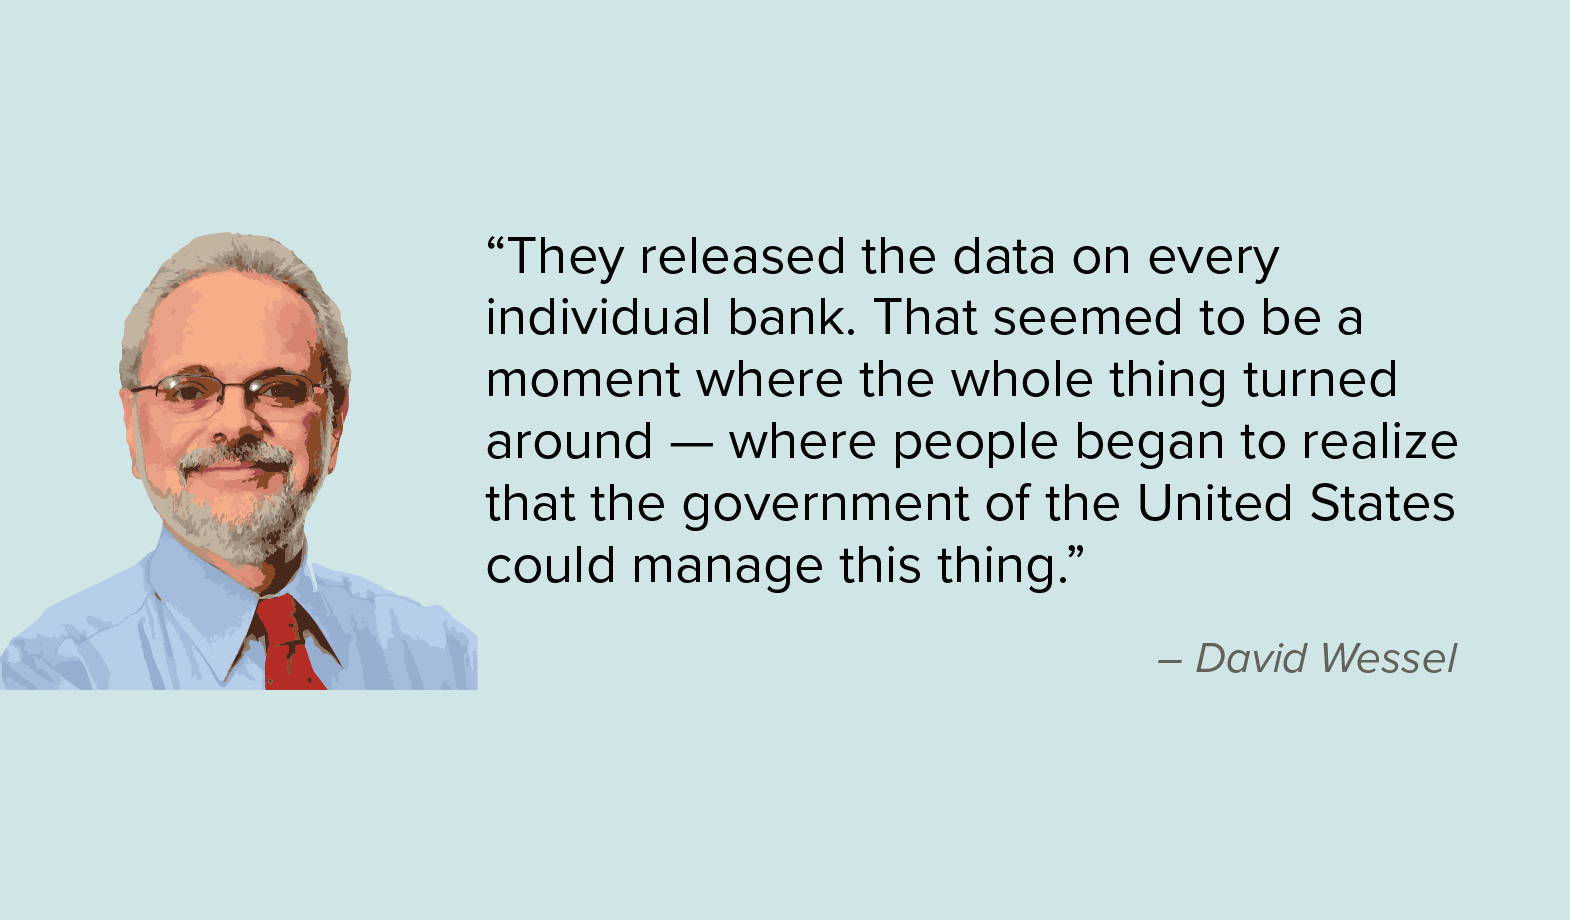 David Wessel: “They released the data on every individual bank. That seemed to be a moment where the whole thing turned around.“ 